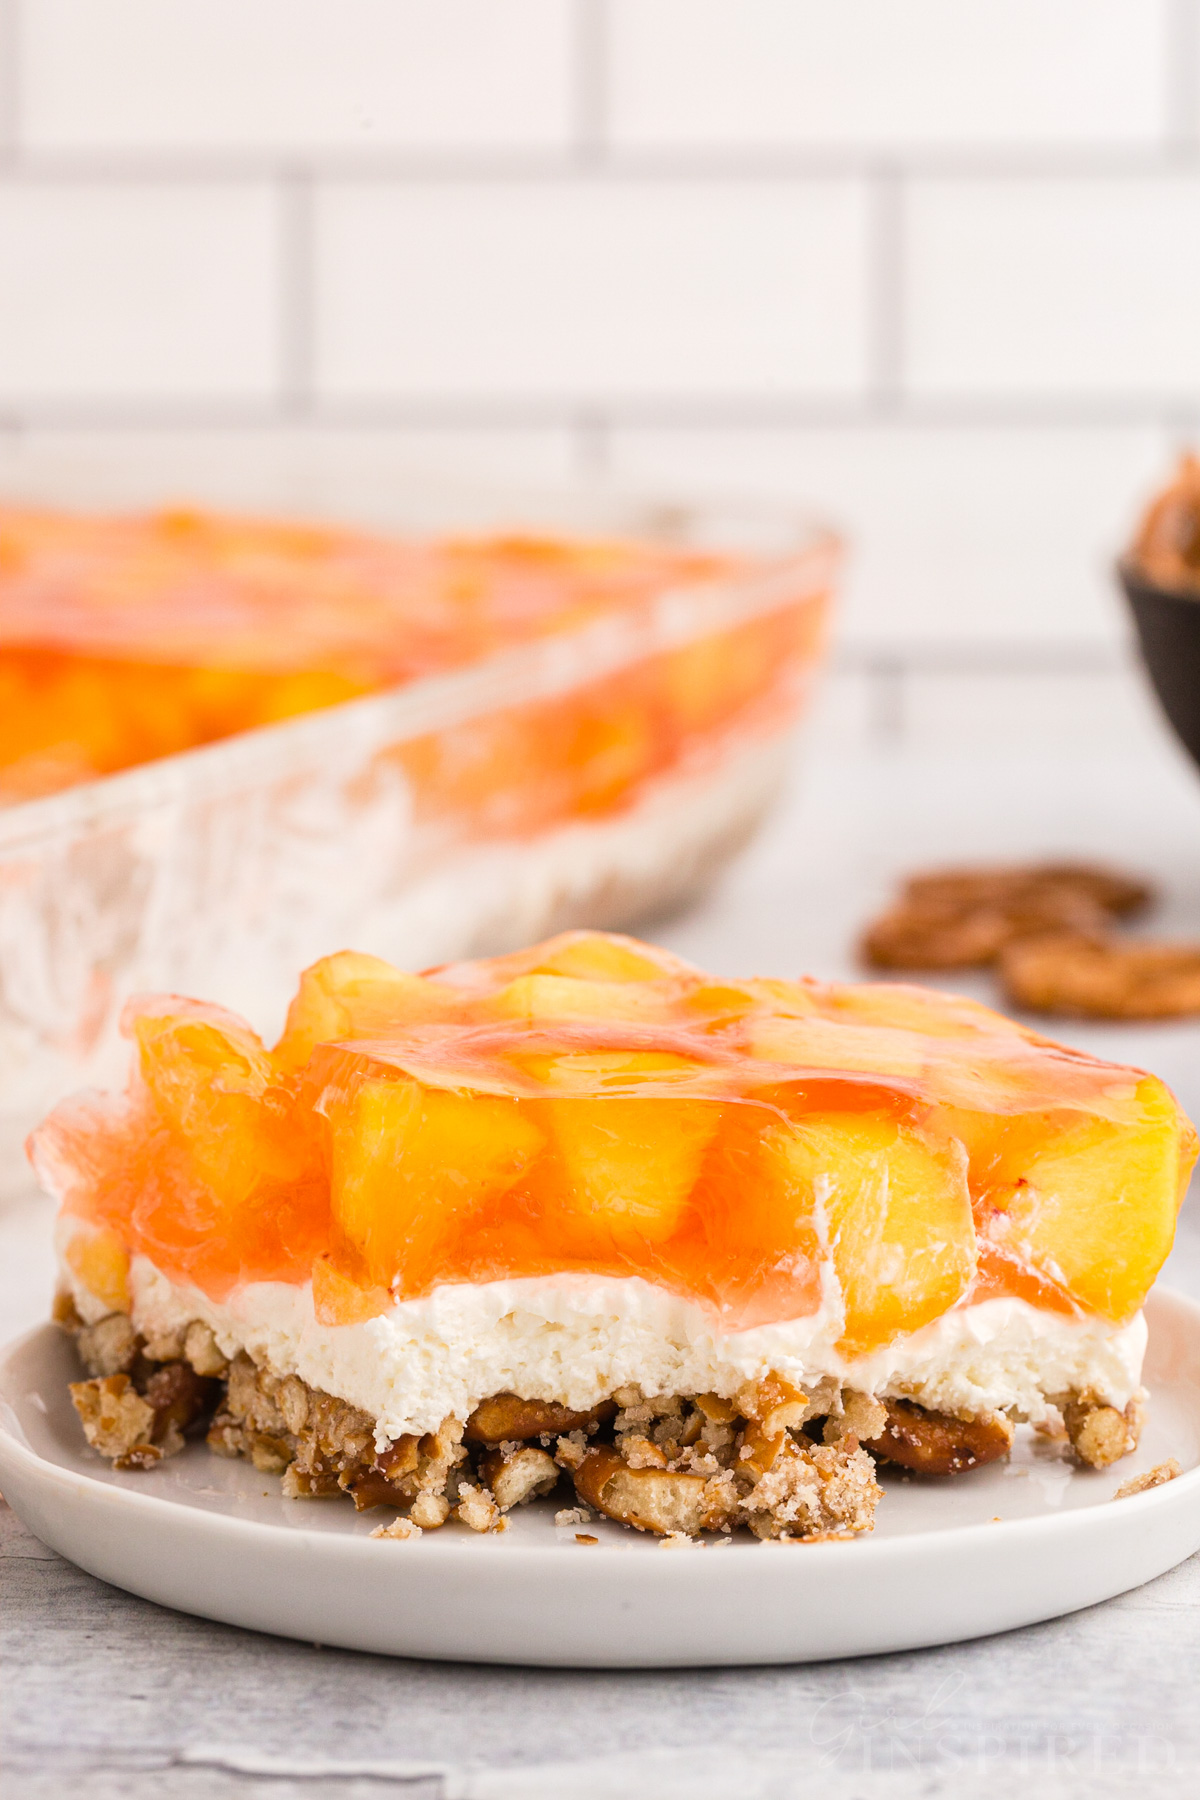 Slice of peach pretzel salad on a white place, on top of a marble countertop